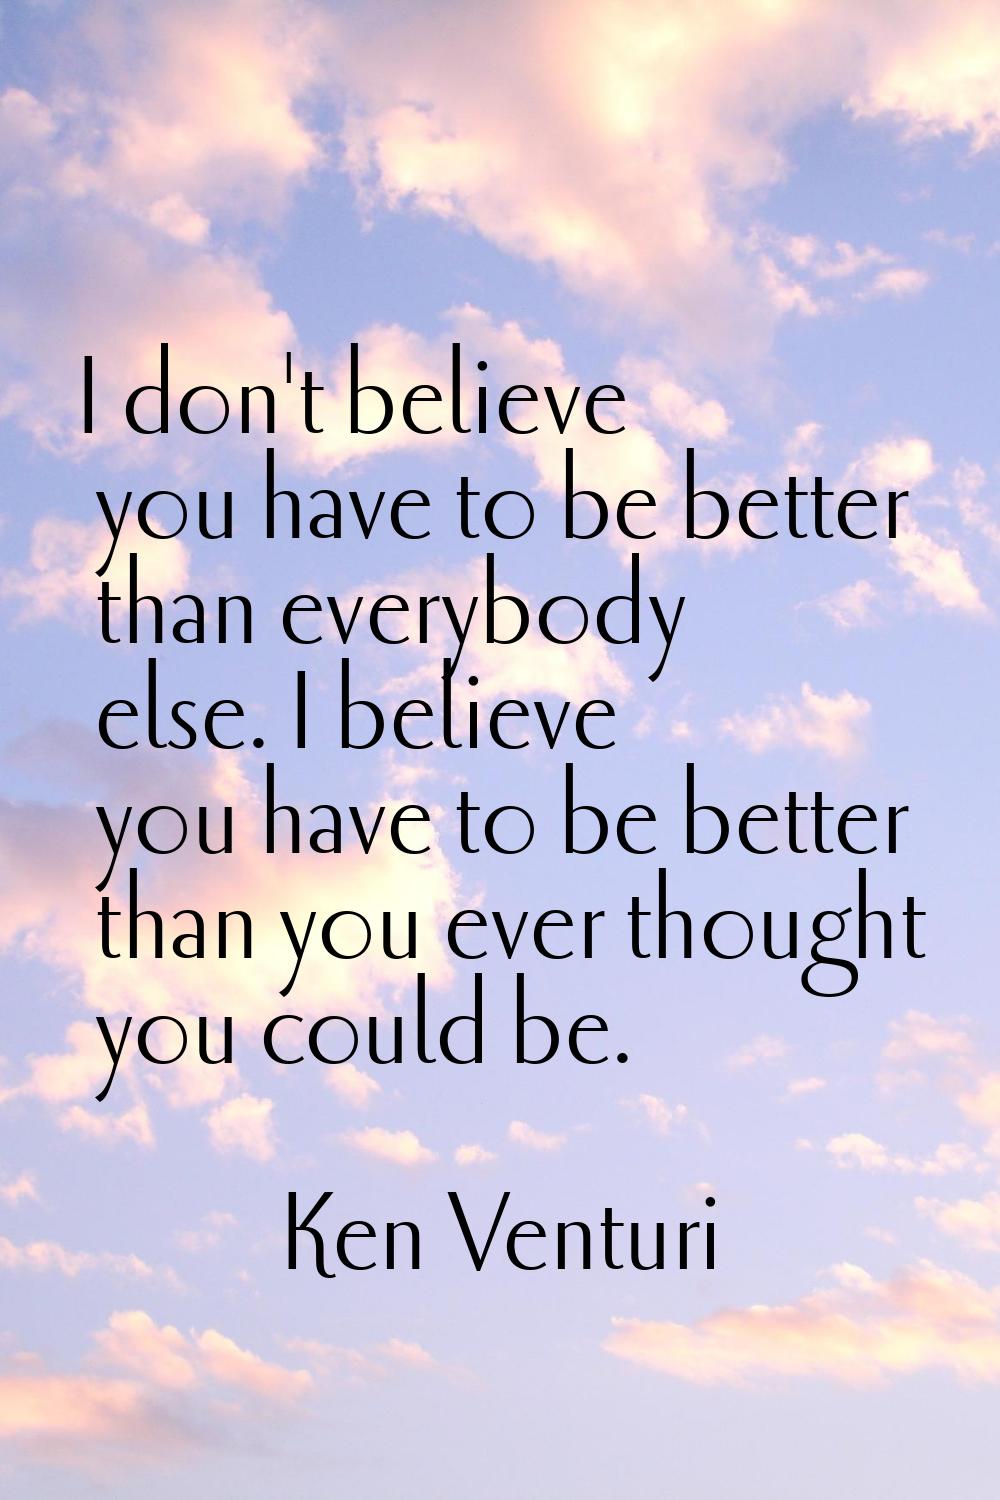 I don't believe you have to be better than everybody else. I believe you have to be better than you